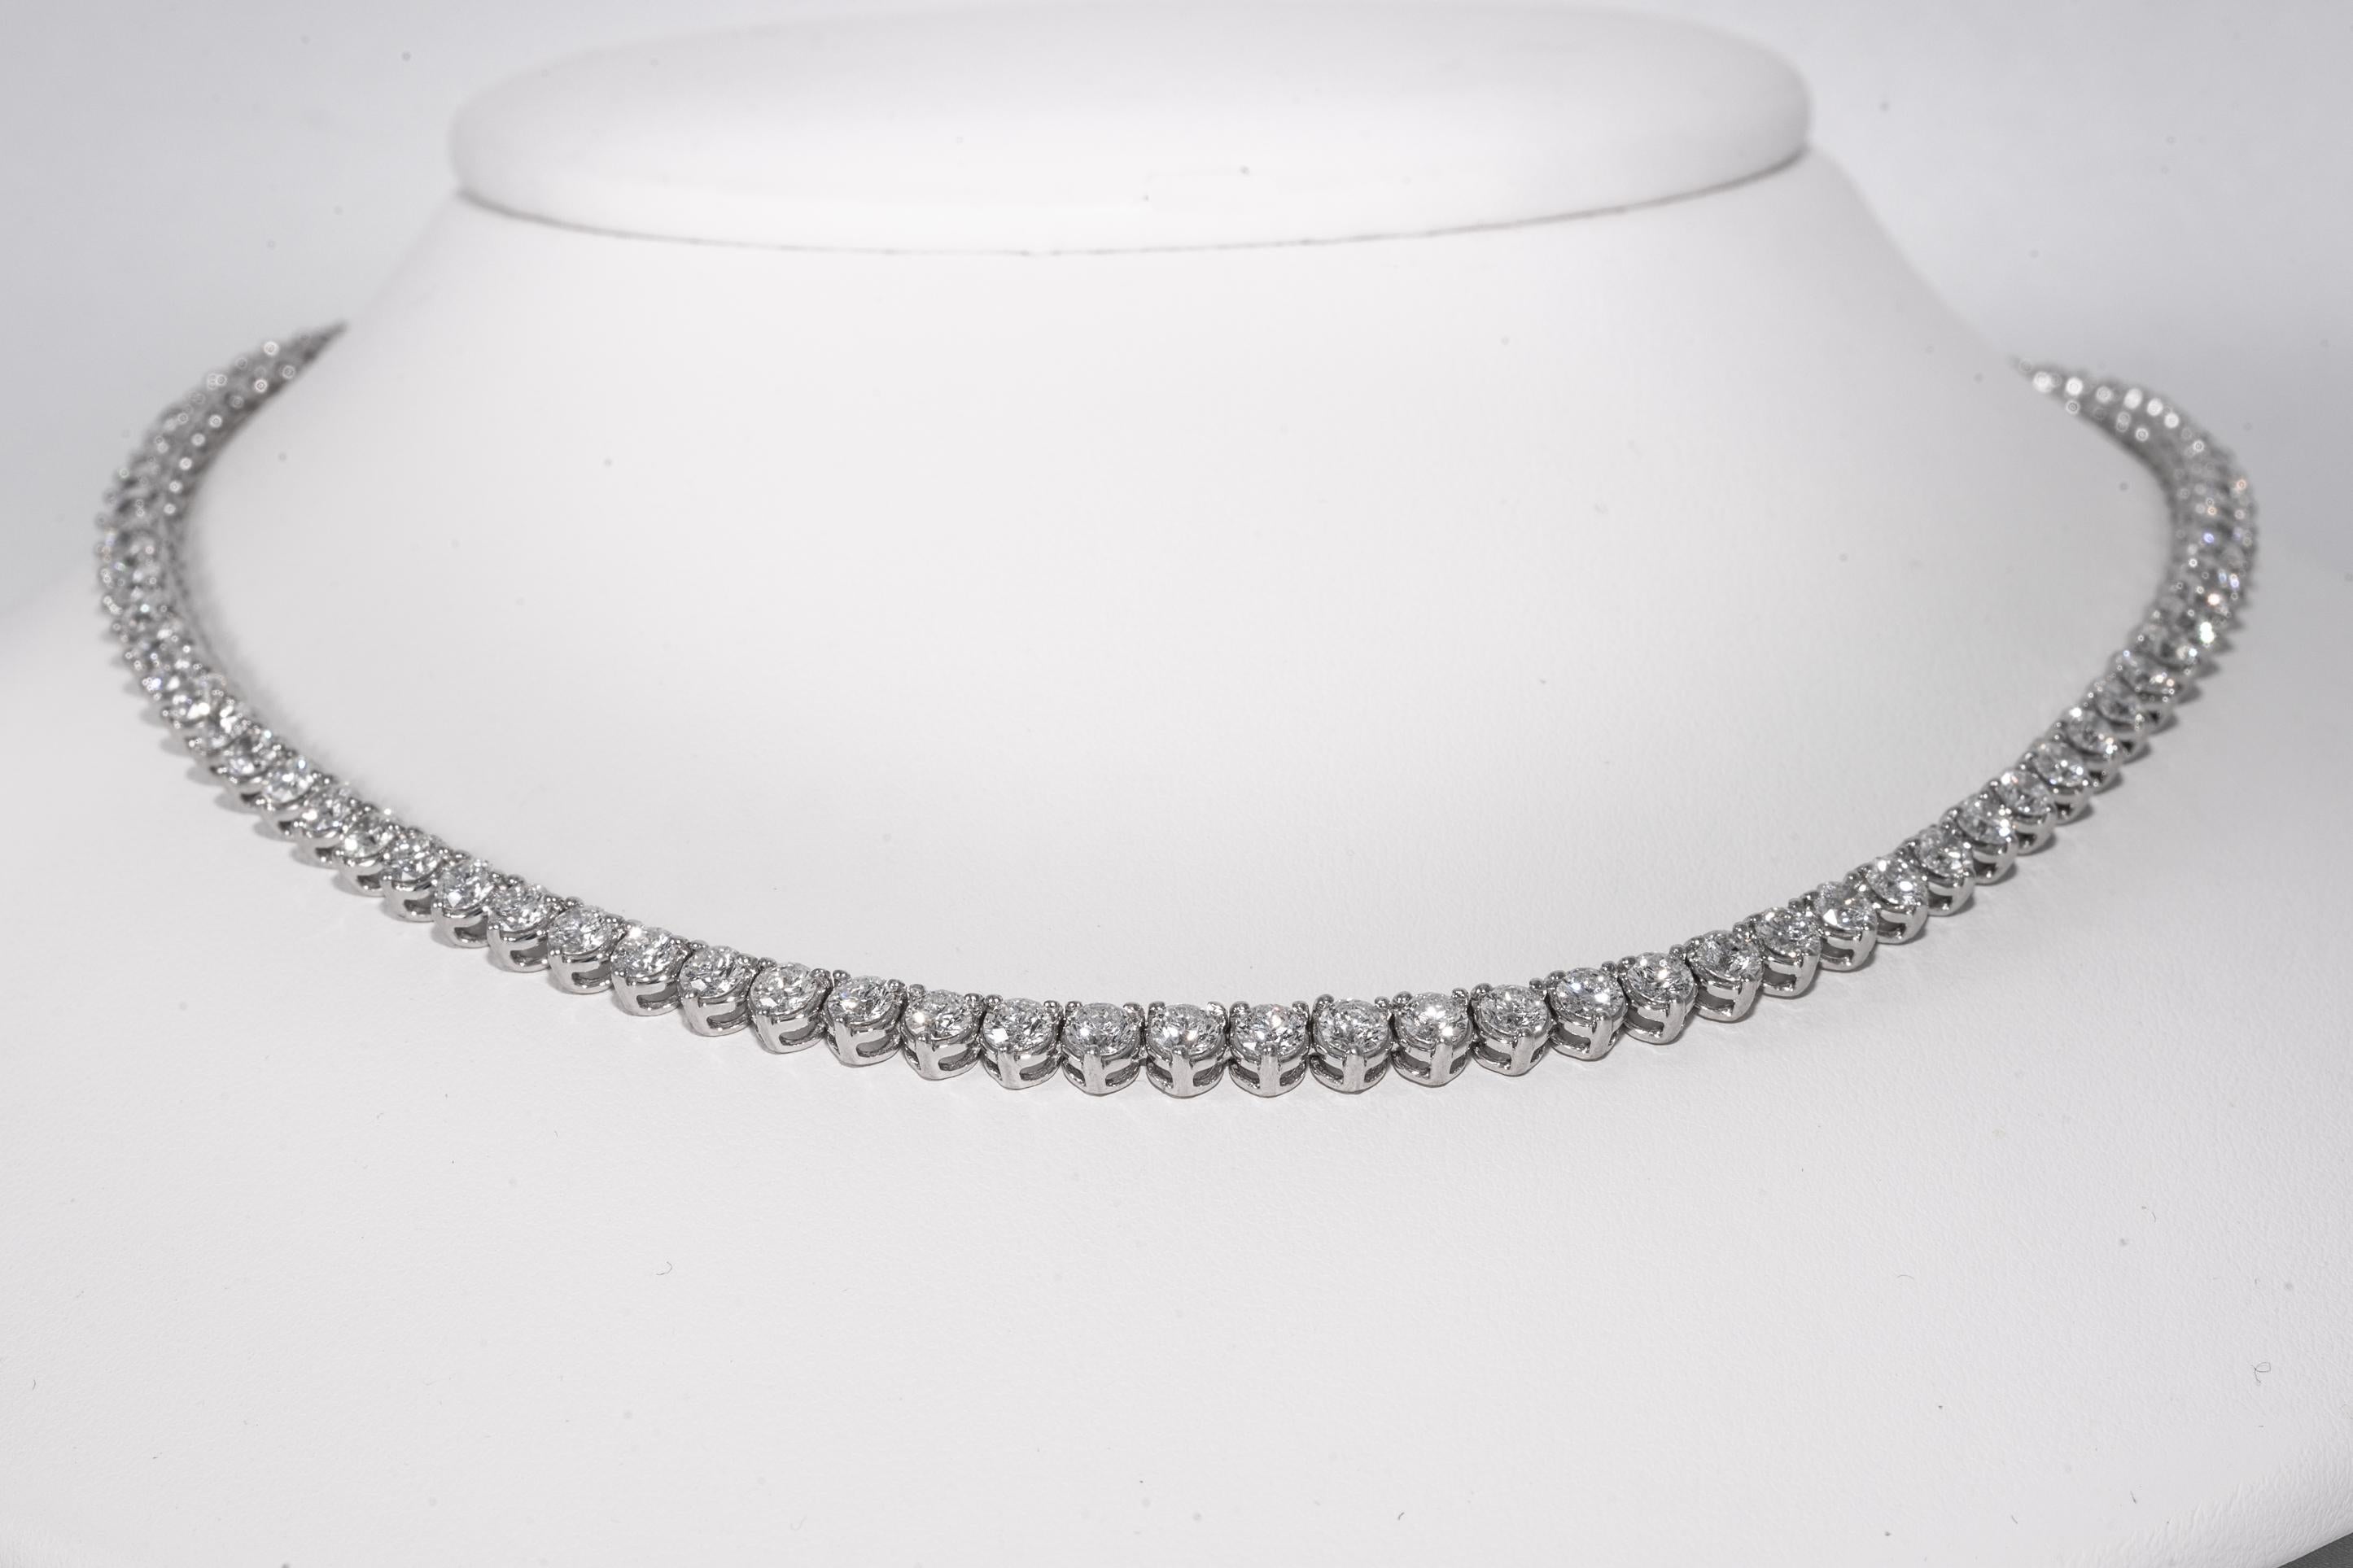 Classic Diamond Line necklace in 18 kt gold with 100 perfectly matched ( .13 ct each , 3.2 mm) 
round brilliant diamonds , with exceptional E color and SI2 clarity.  
Necklace is heavy weight , and exceptional craftsmanship.
Total carat weight of